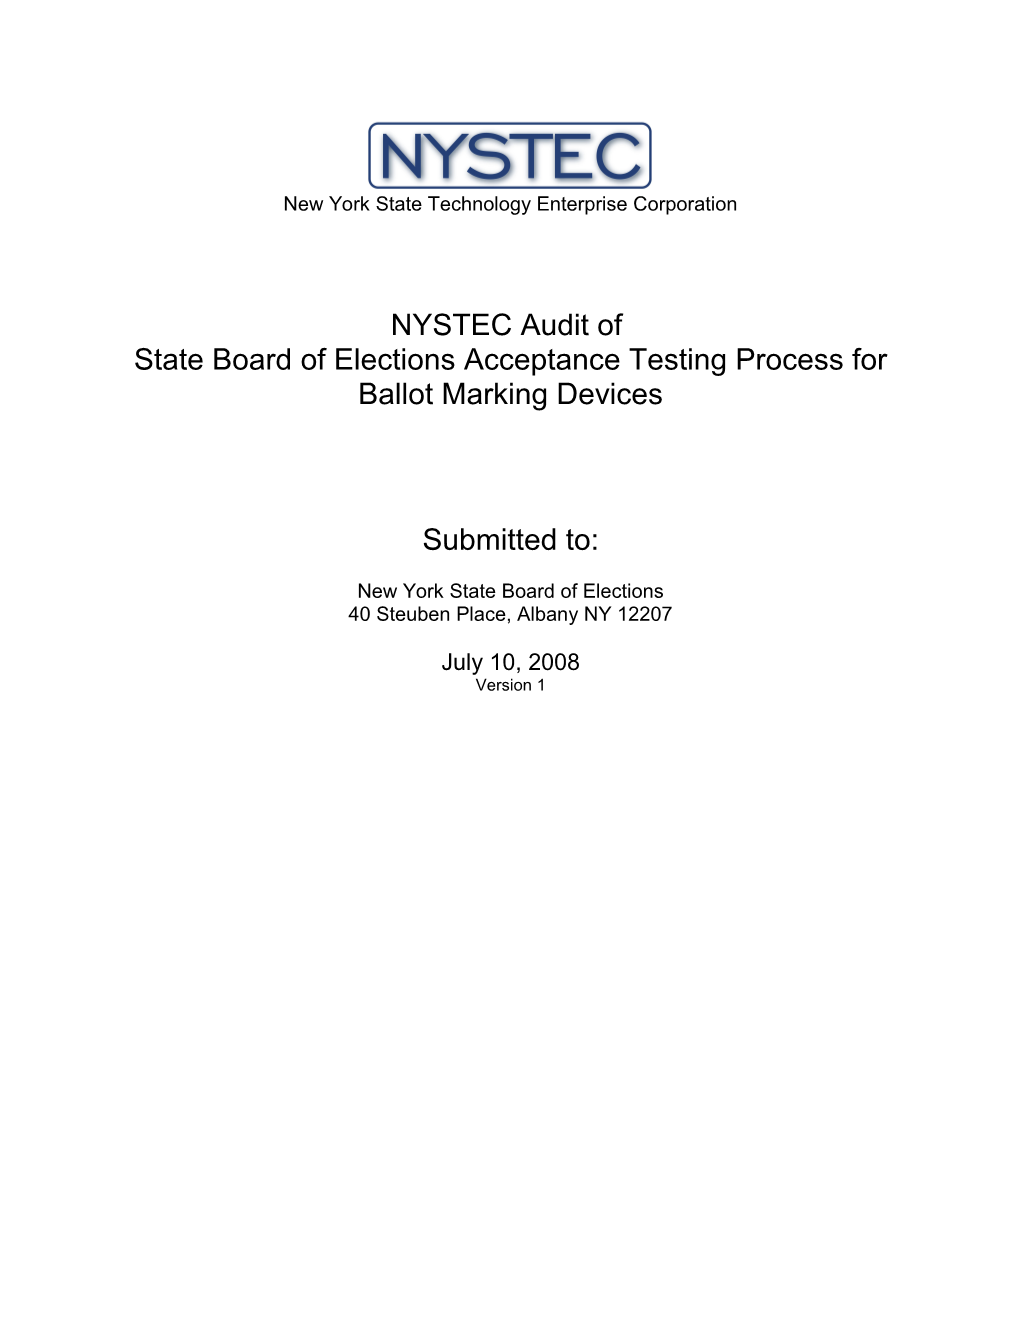 NYSTEC Audit of SBOE Acceptance Testing